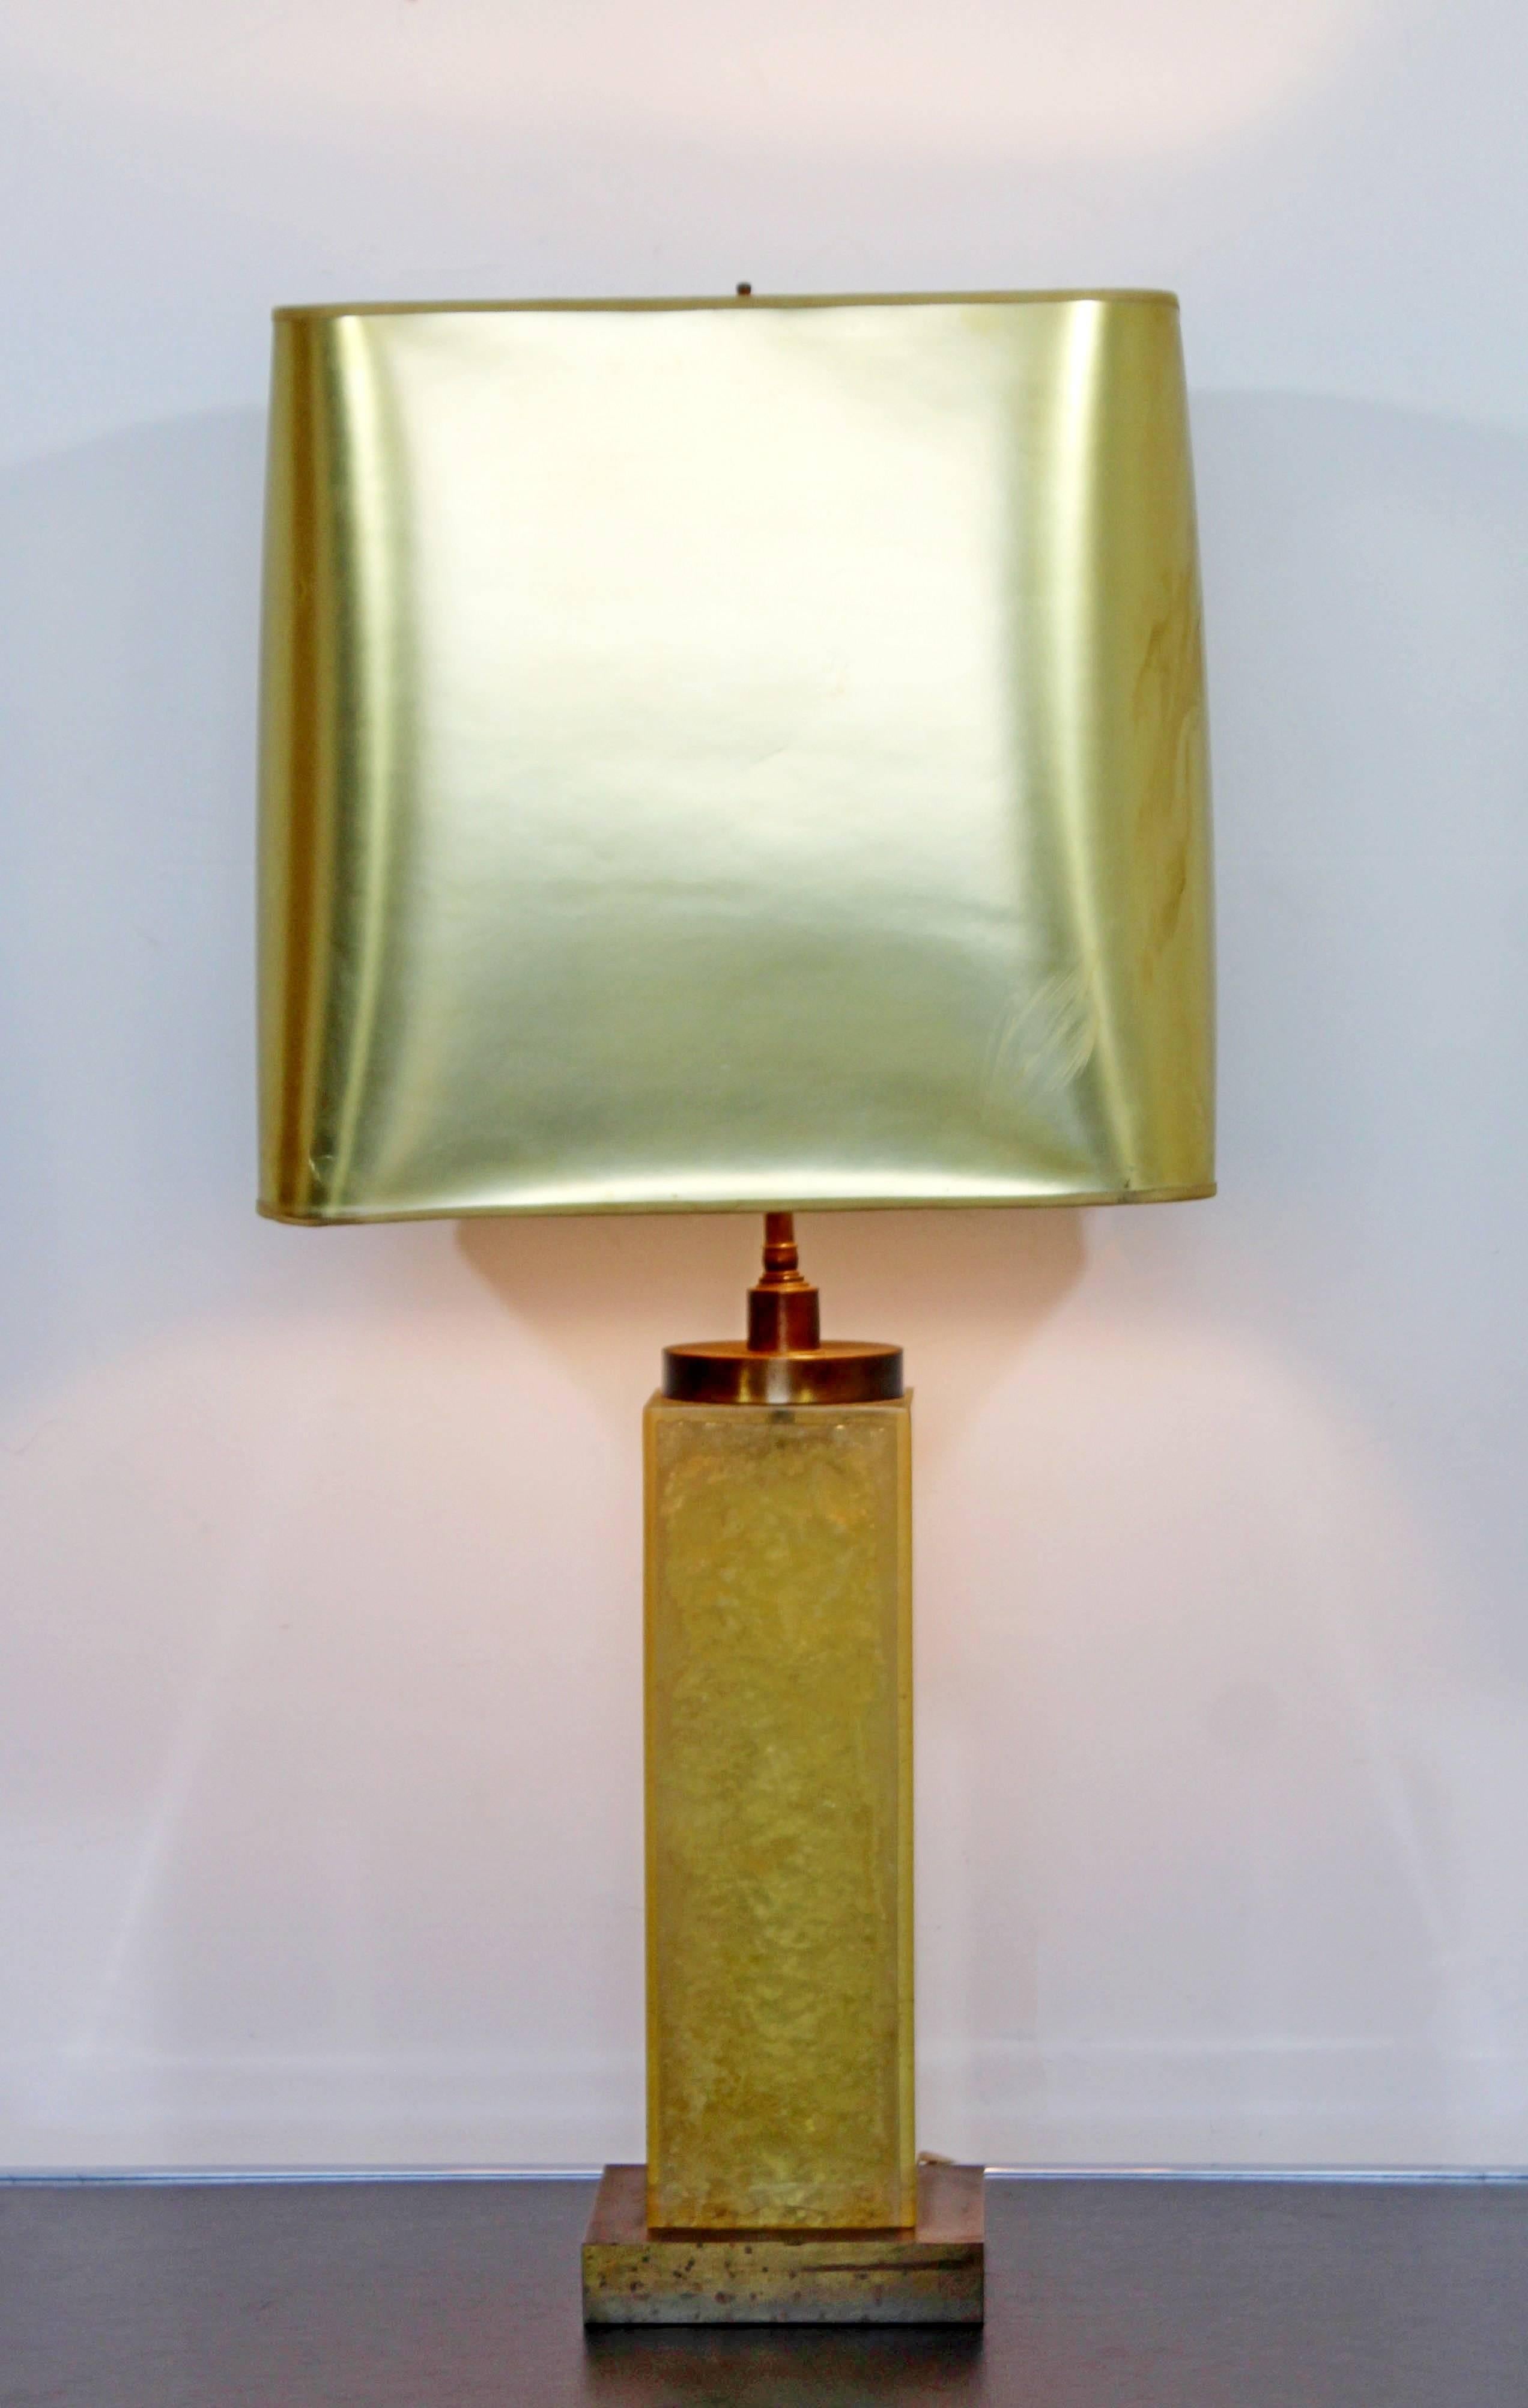 For your consideration is a phenomenal, fractured resin and brass, table lamp by Marie Claude De Fouquieres, France, circa 1970s. In excellent condition, original shade is in vintage condition. The dimensions of the lamp are 6.5